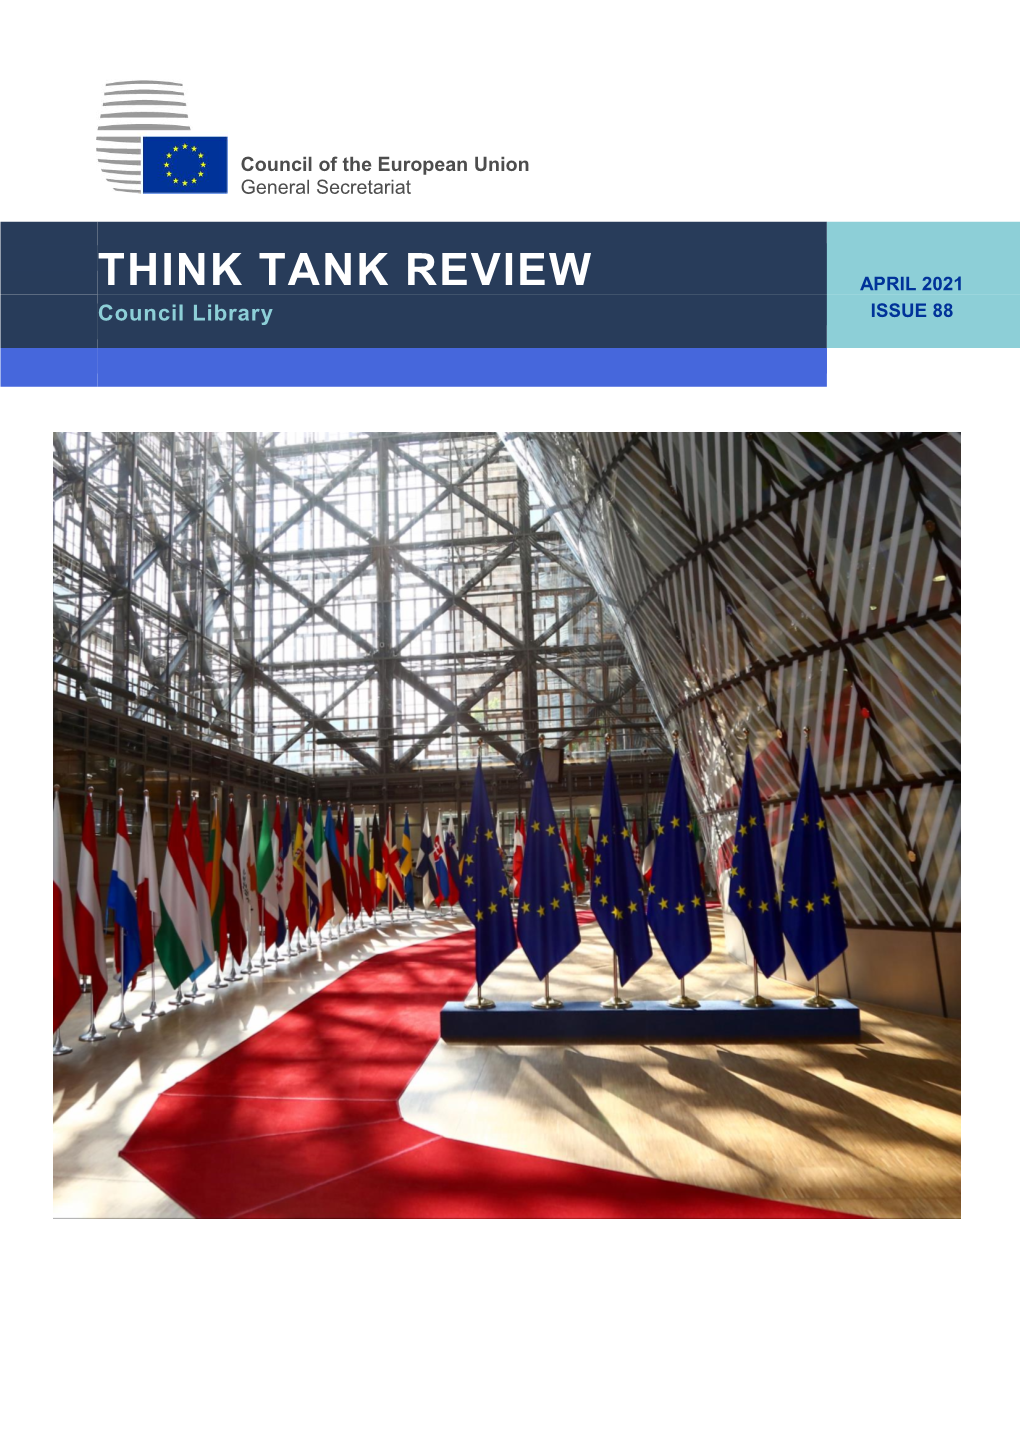 THINK TANK REVIEW APRIL 2021 Council Library ISSUE 88